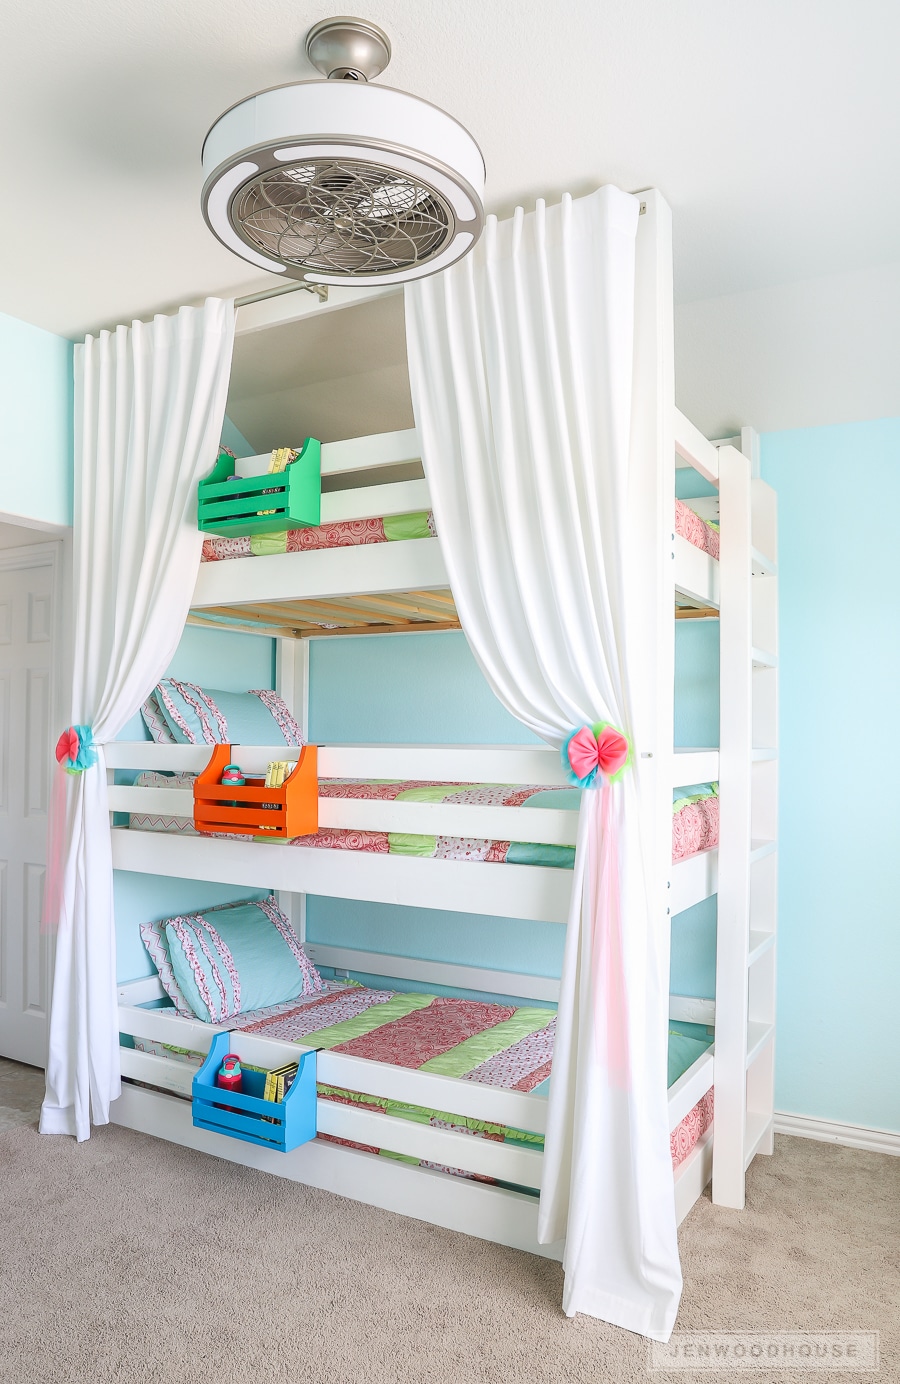 How To Build A Diy Triple Bunk Bed, Full Size Bunk Bed Ideas